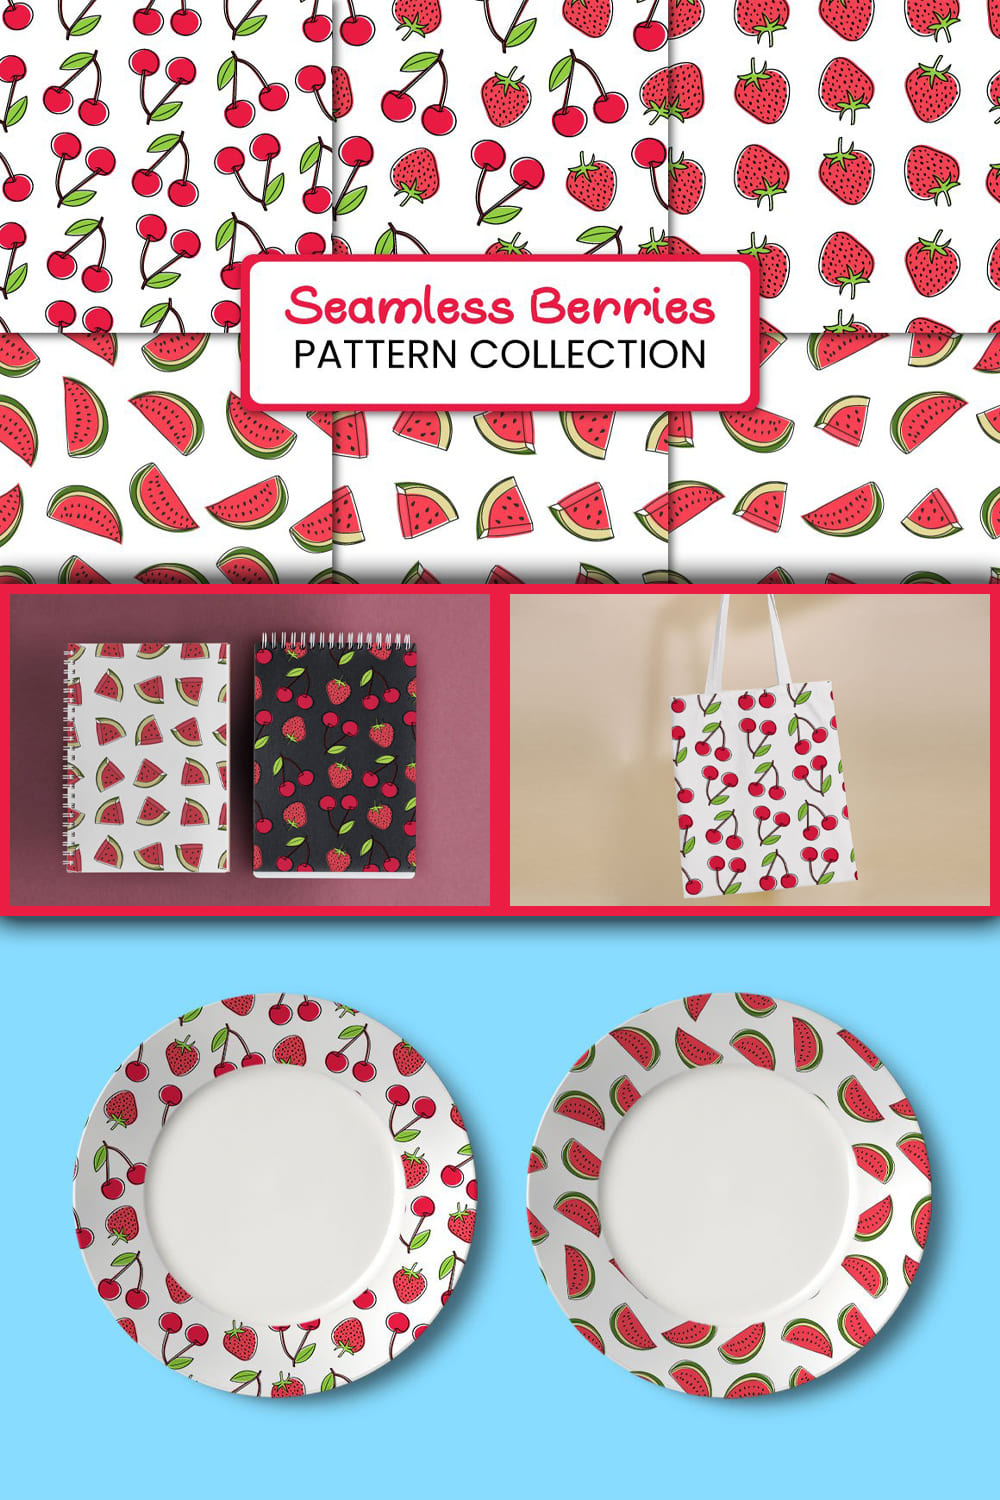 Objects with a berry print are drawn on colored backgrounds.